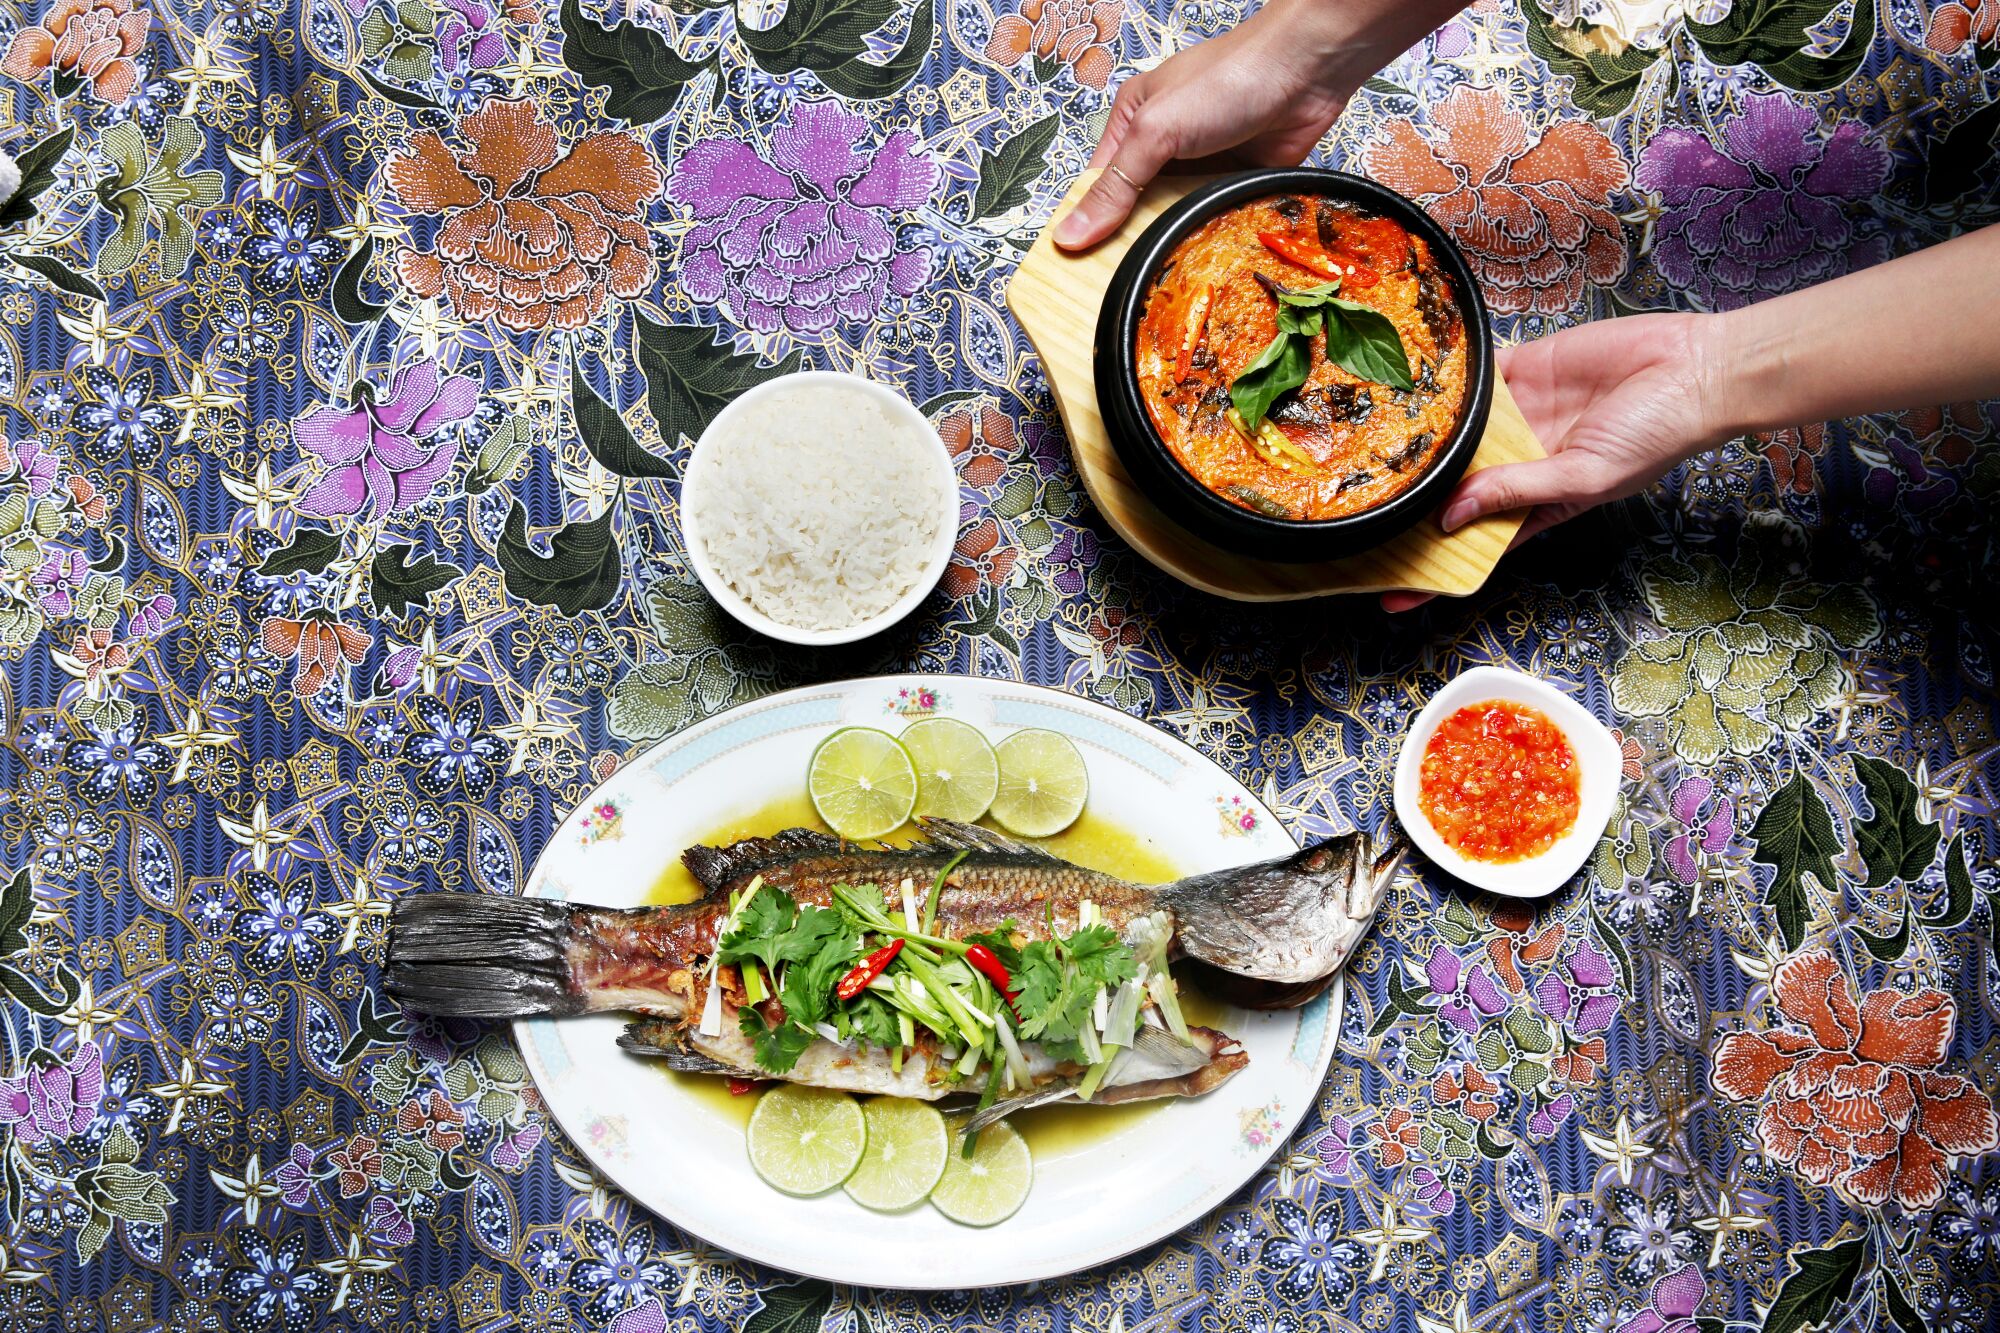 An overhead photo of whole dry-aged fish on a plate, with a set of hands holding a dish of fish curry "custard."